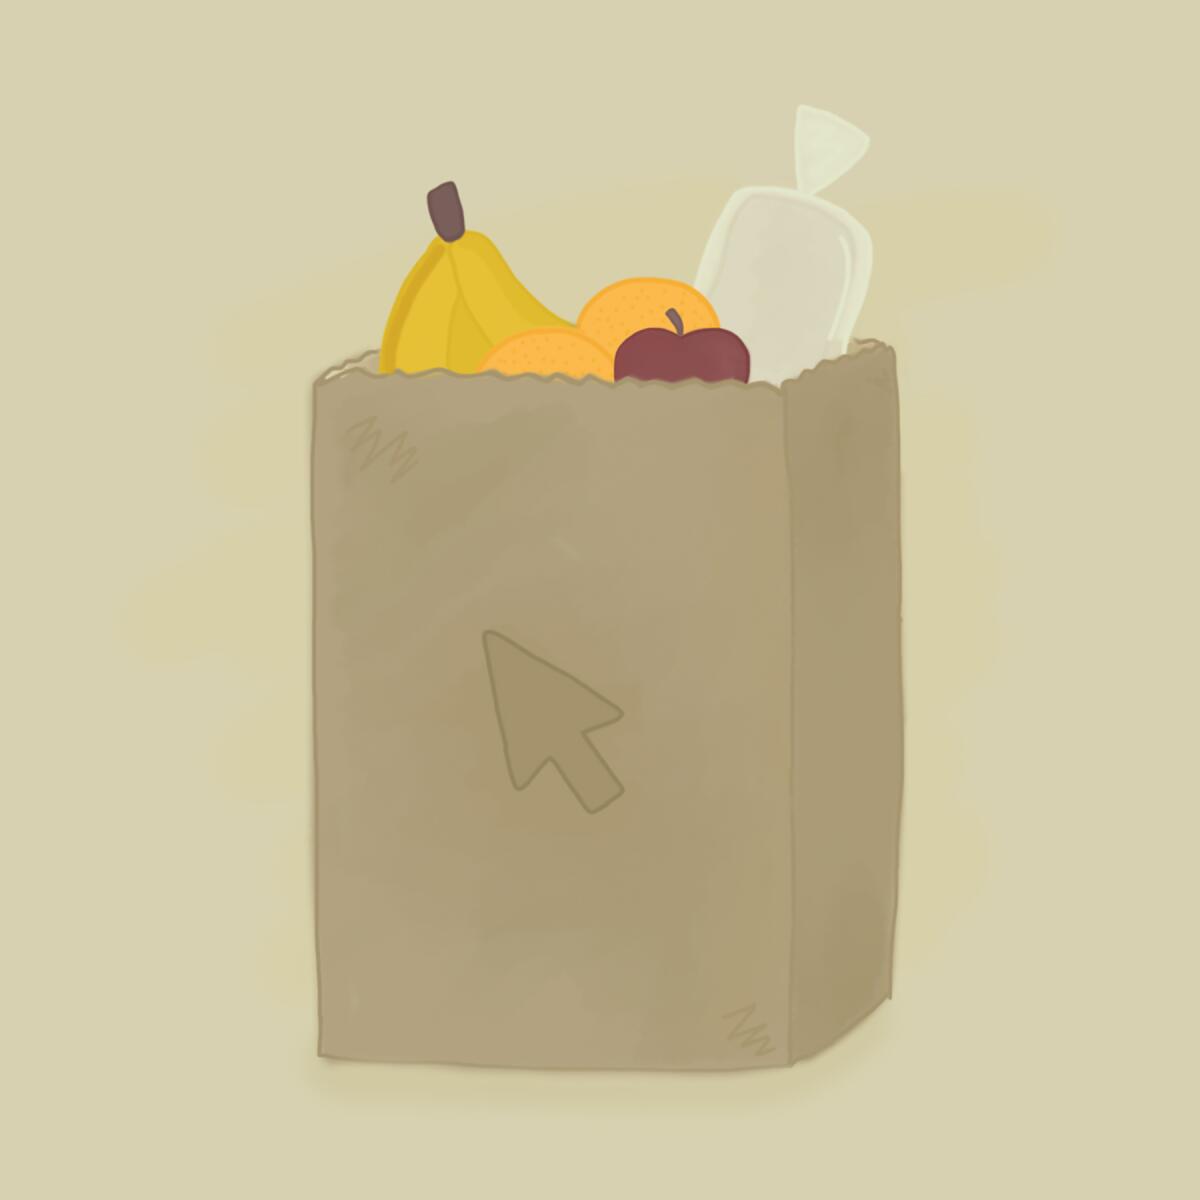 Illustration of a bag of groceries with a mouse cursor on it.